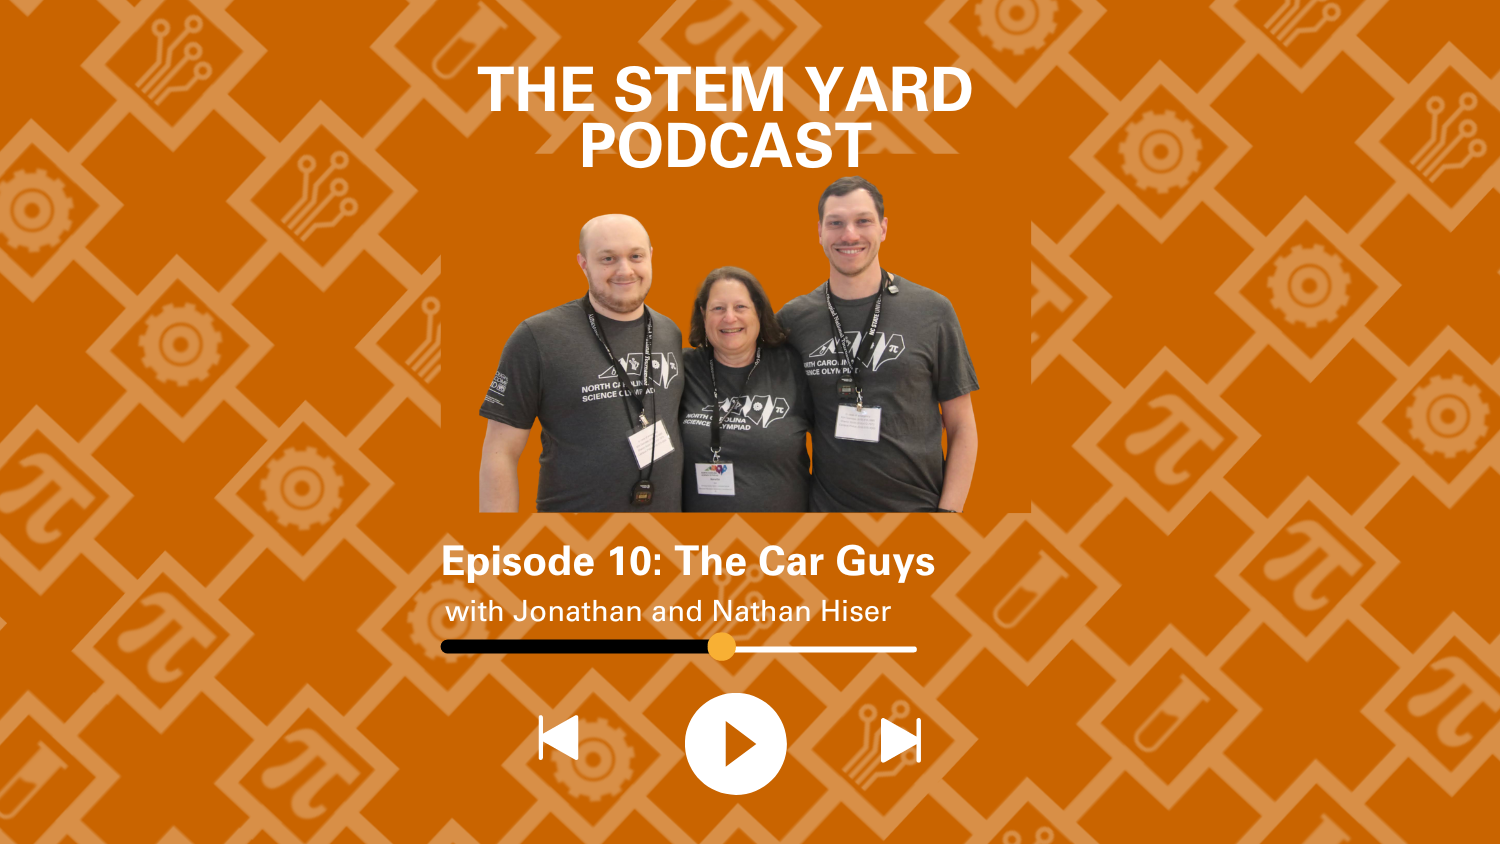 The STEM Yard Episode 10 - The Car Guys with Jonathan and Nathan Hiser